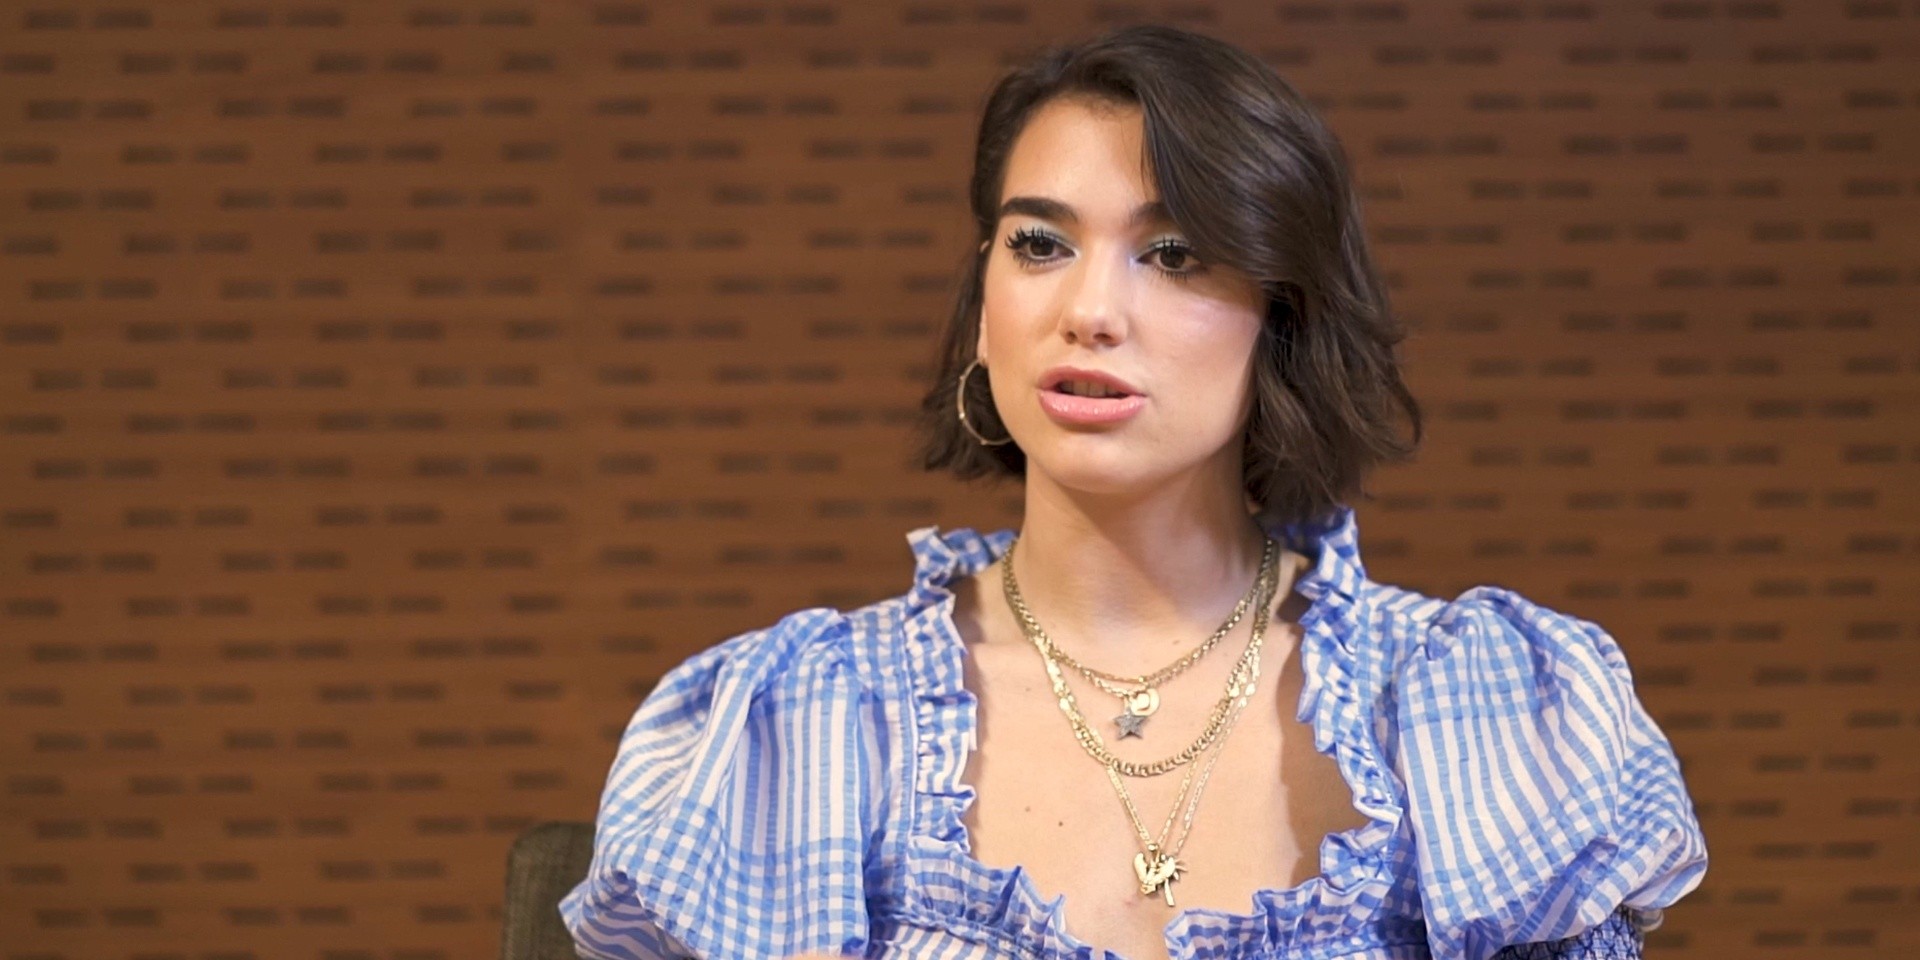 Dua Lipa talks about her new album and reacts to a Singaporean parody of 'New Rules’ – watch